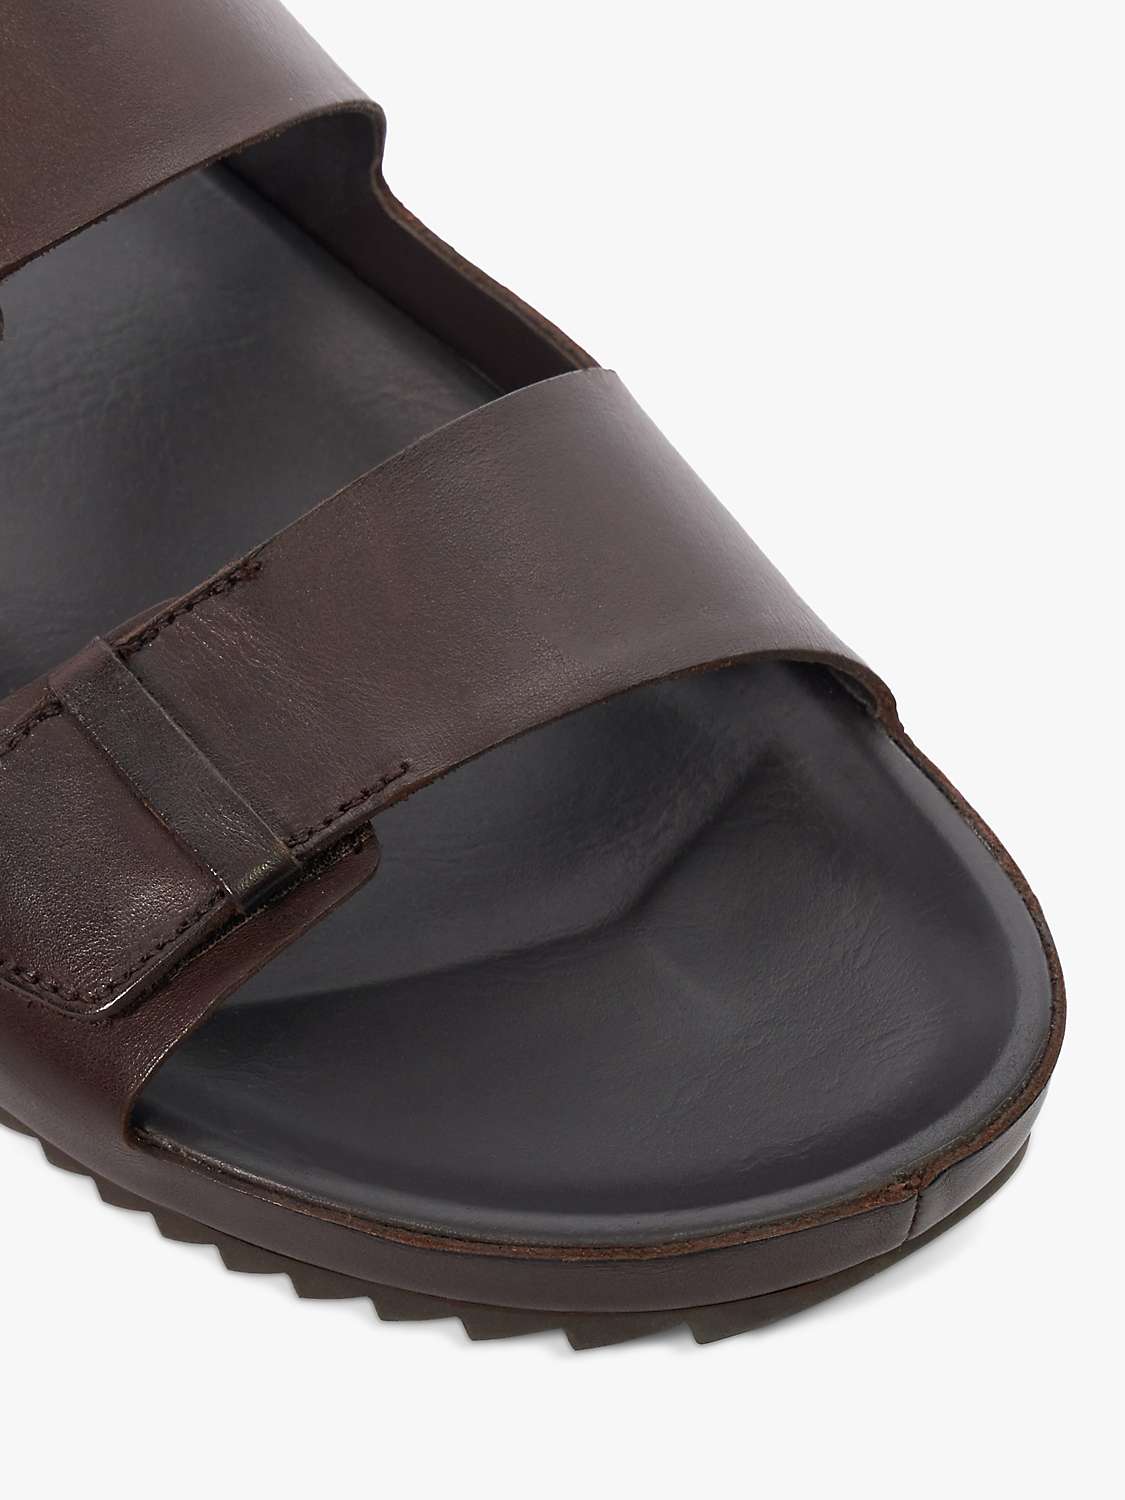 Buy Dune Intells Leather Double Strap Sandals, Brown Online at johnlewis.com